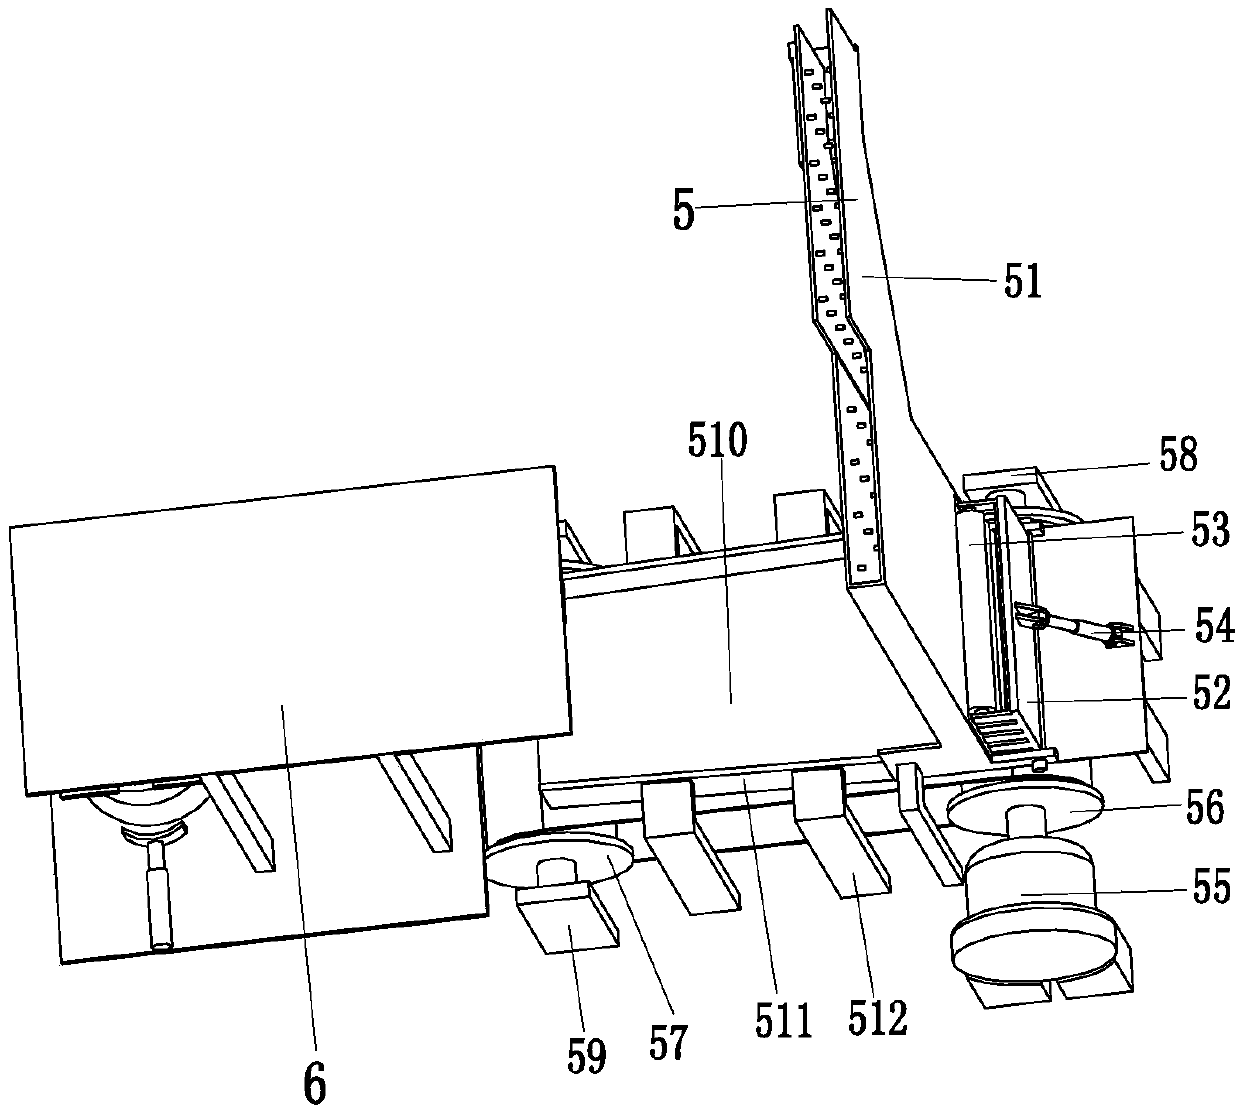 Equipment for automatically conveying metal graphite rod slices and processing graphite gaskets